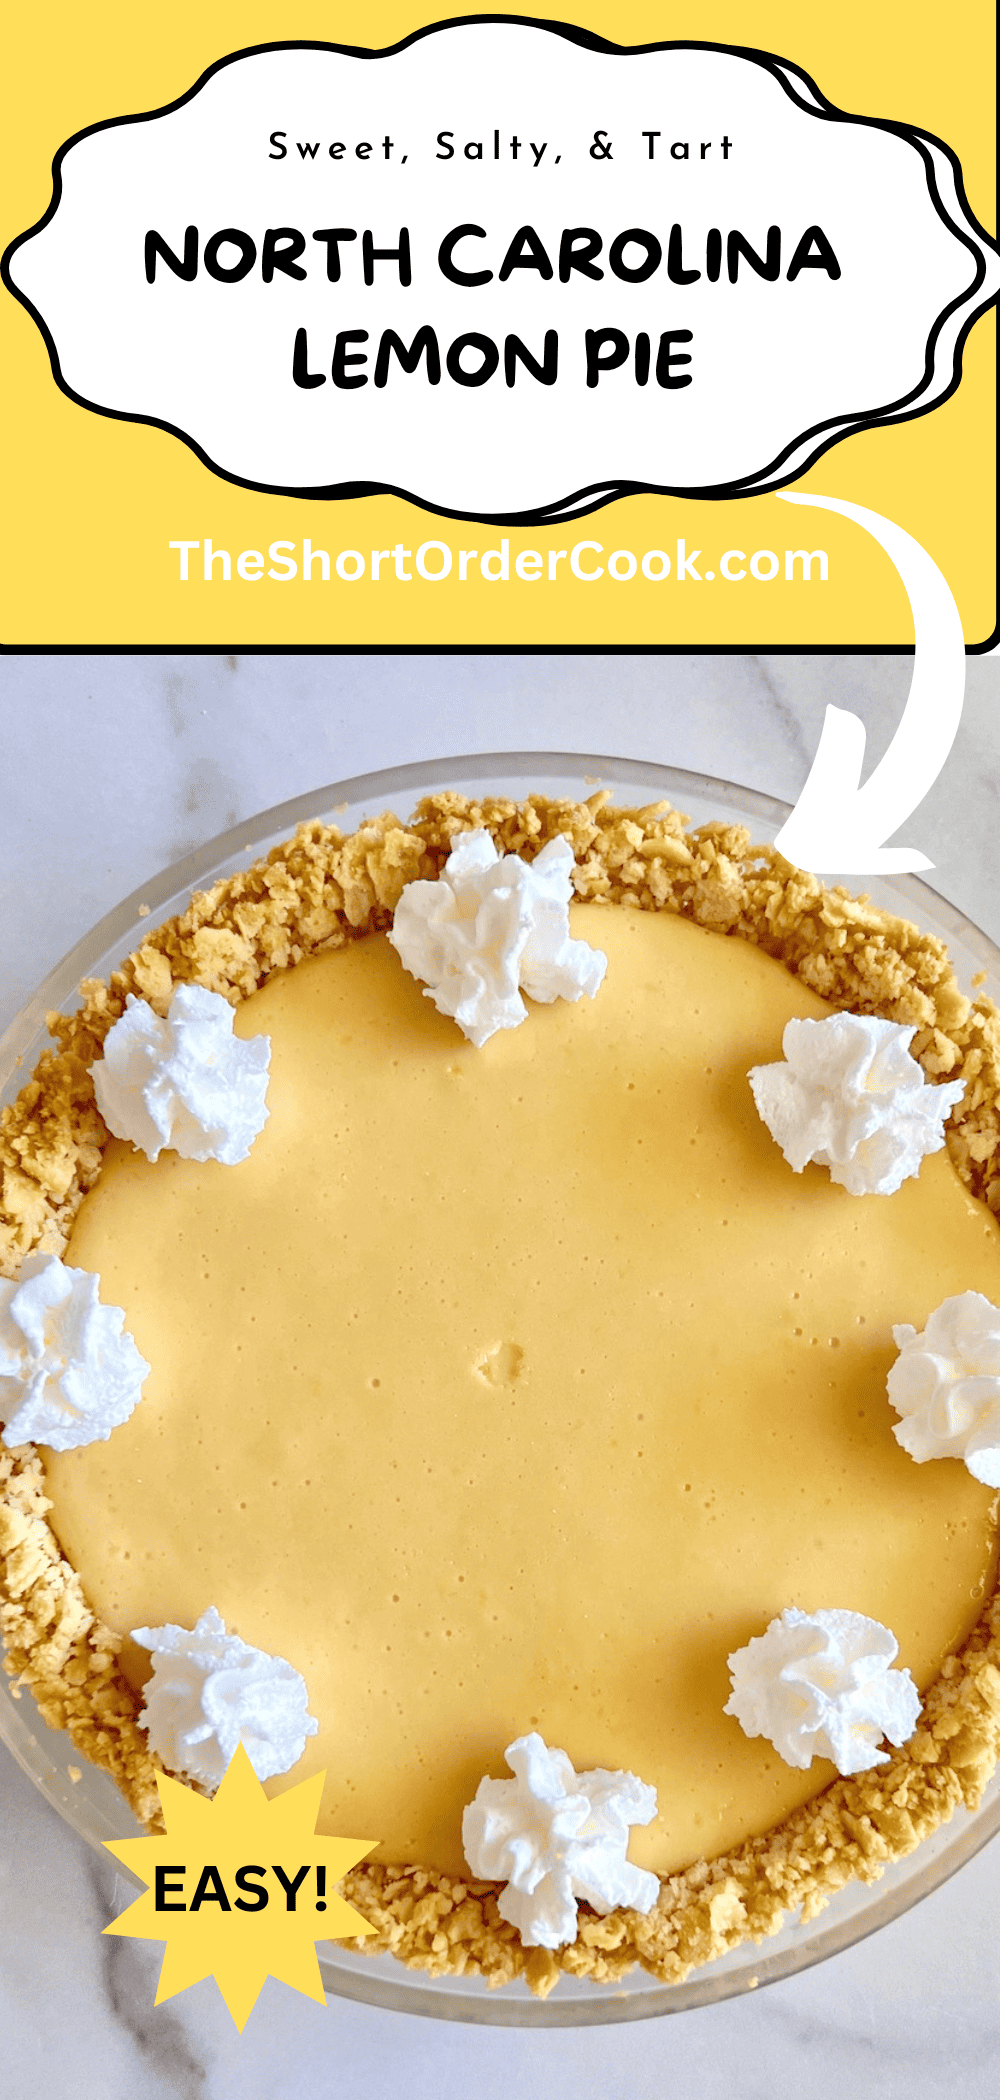 Copycat Atlantic Beach pie into a recipe for a lemon pie popular in north carolina with saltine crust & curd filling topped with whipped cream.